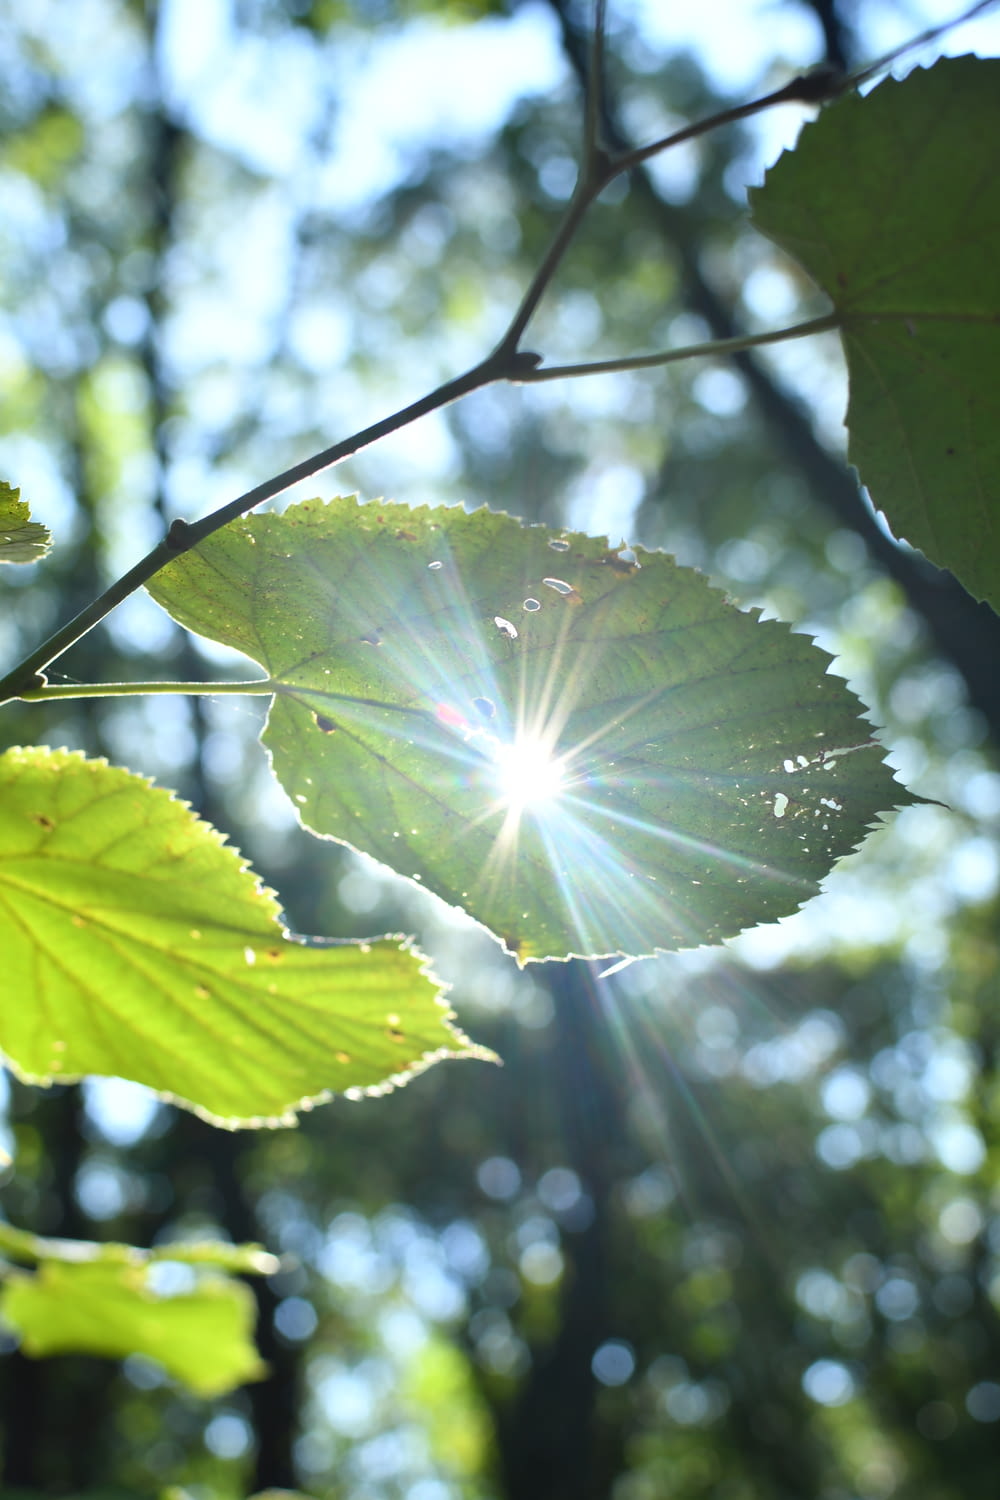 sunlight shining through the leaves of a tree